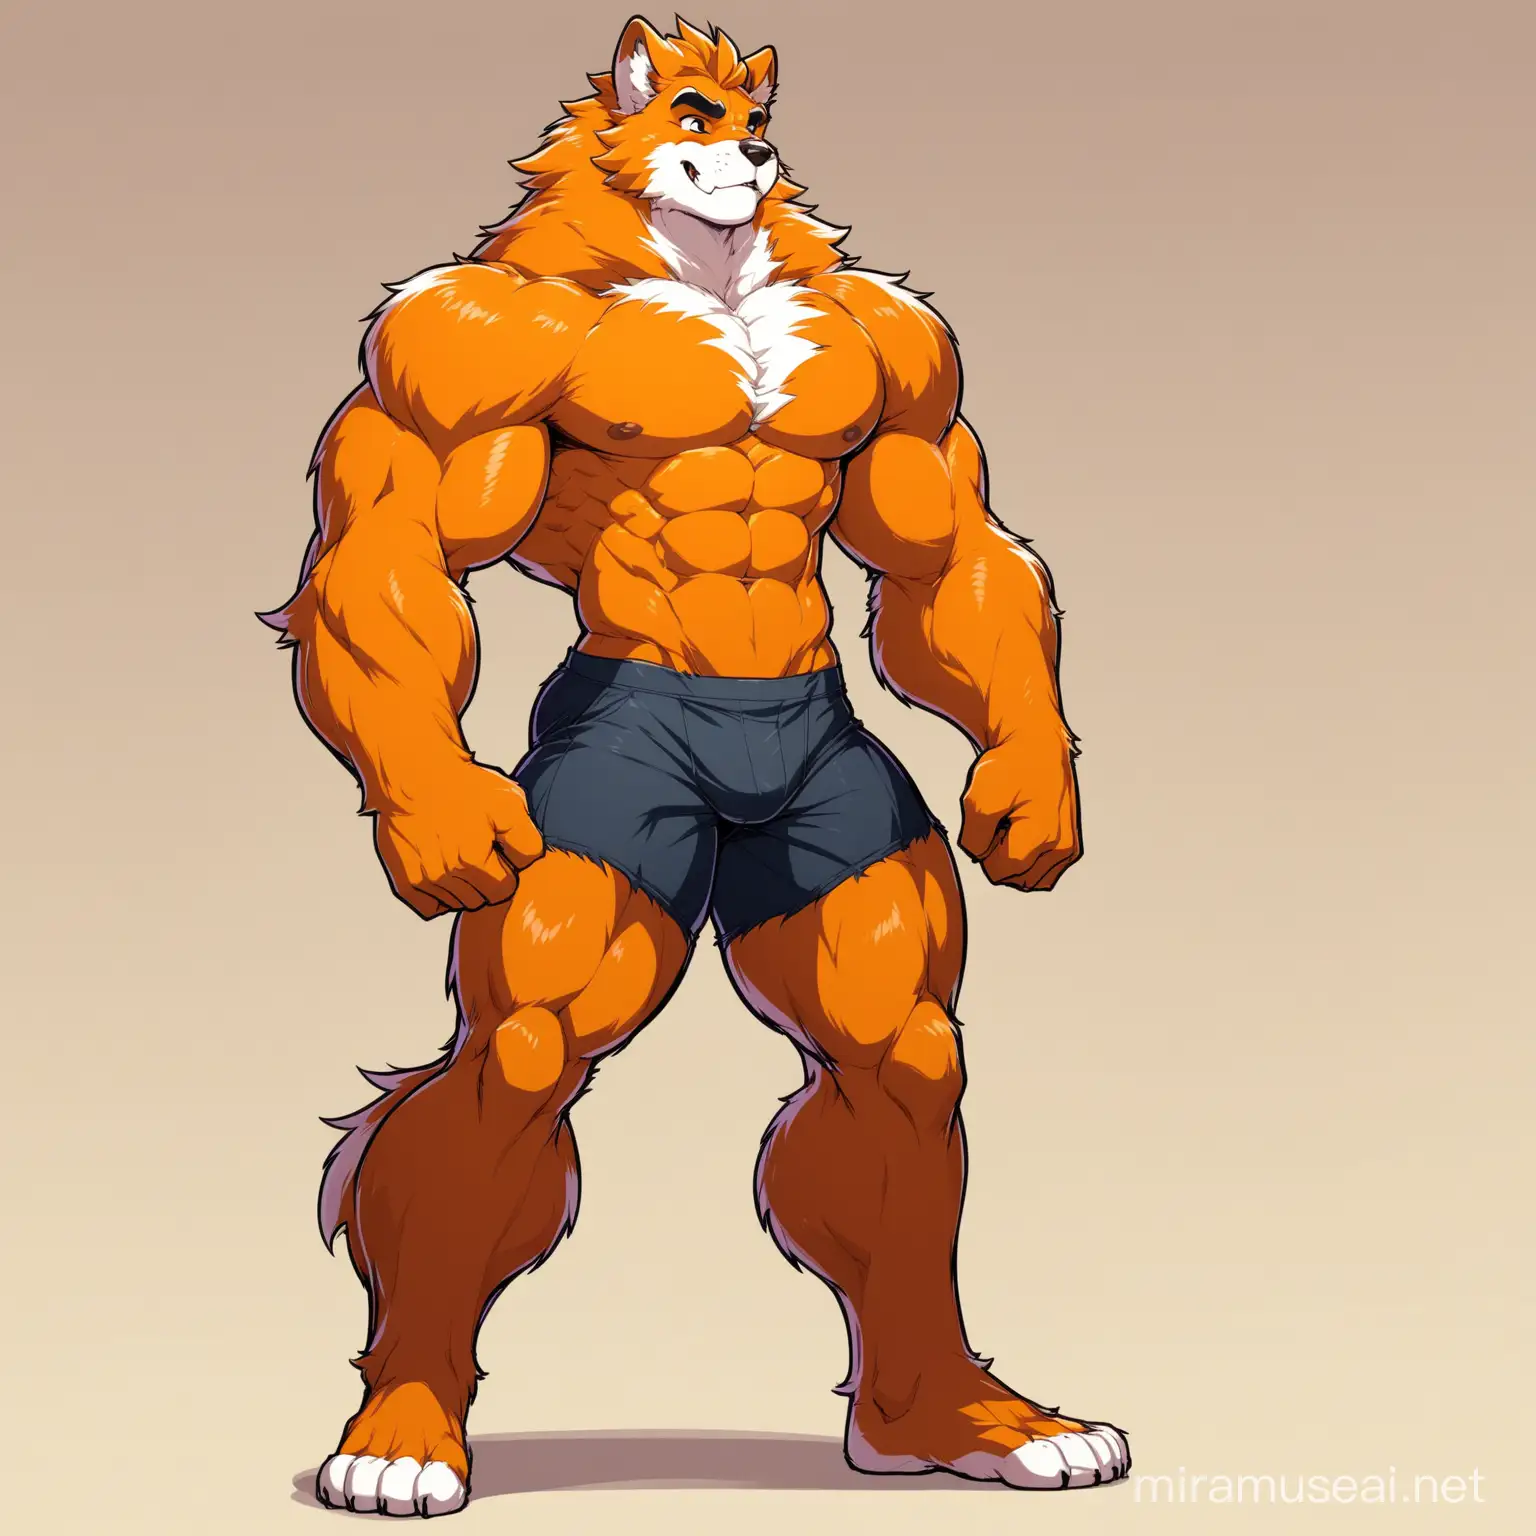 Muscular Tall Man with Furry Companion Strength and Companionship in HighQuality Art